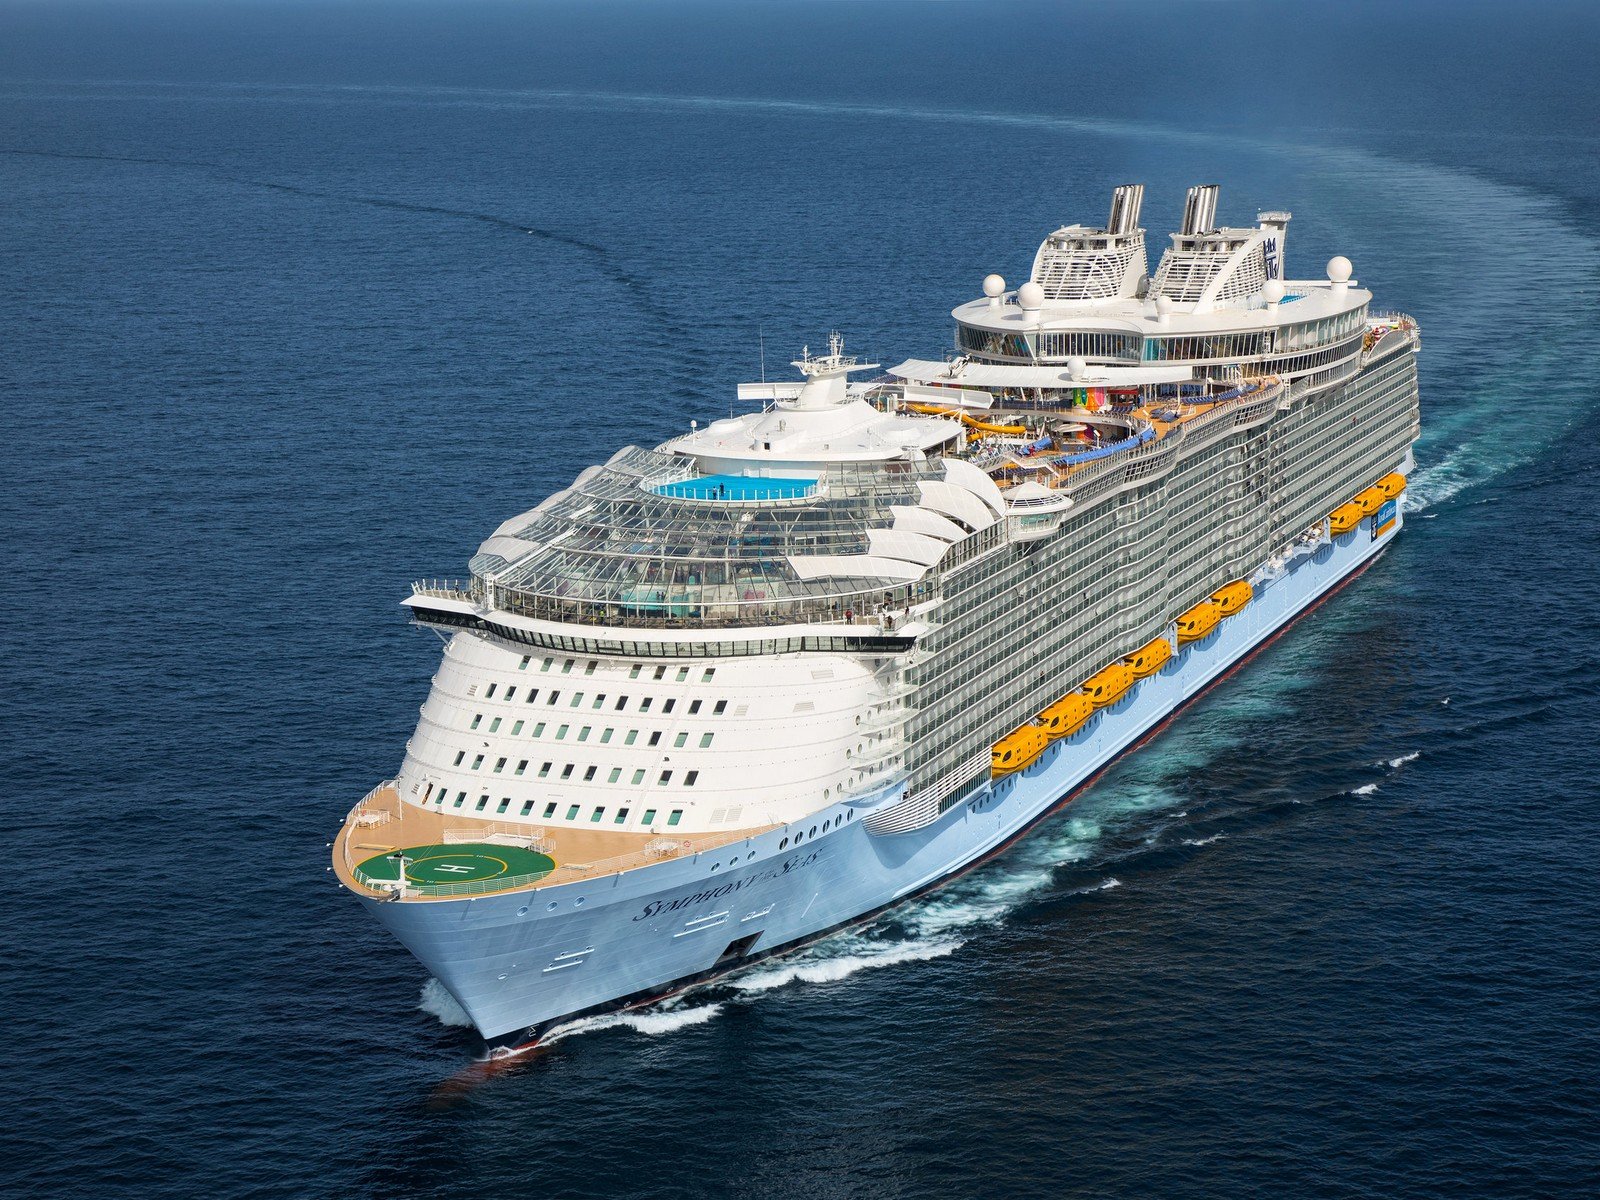 Royal Caribbean will refund your future cruise credits if you don't